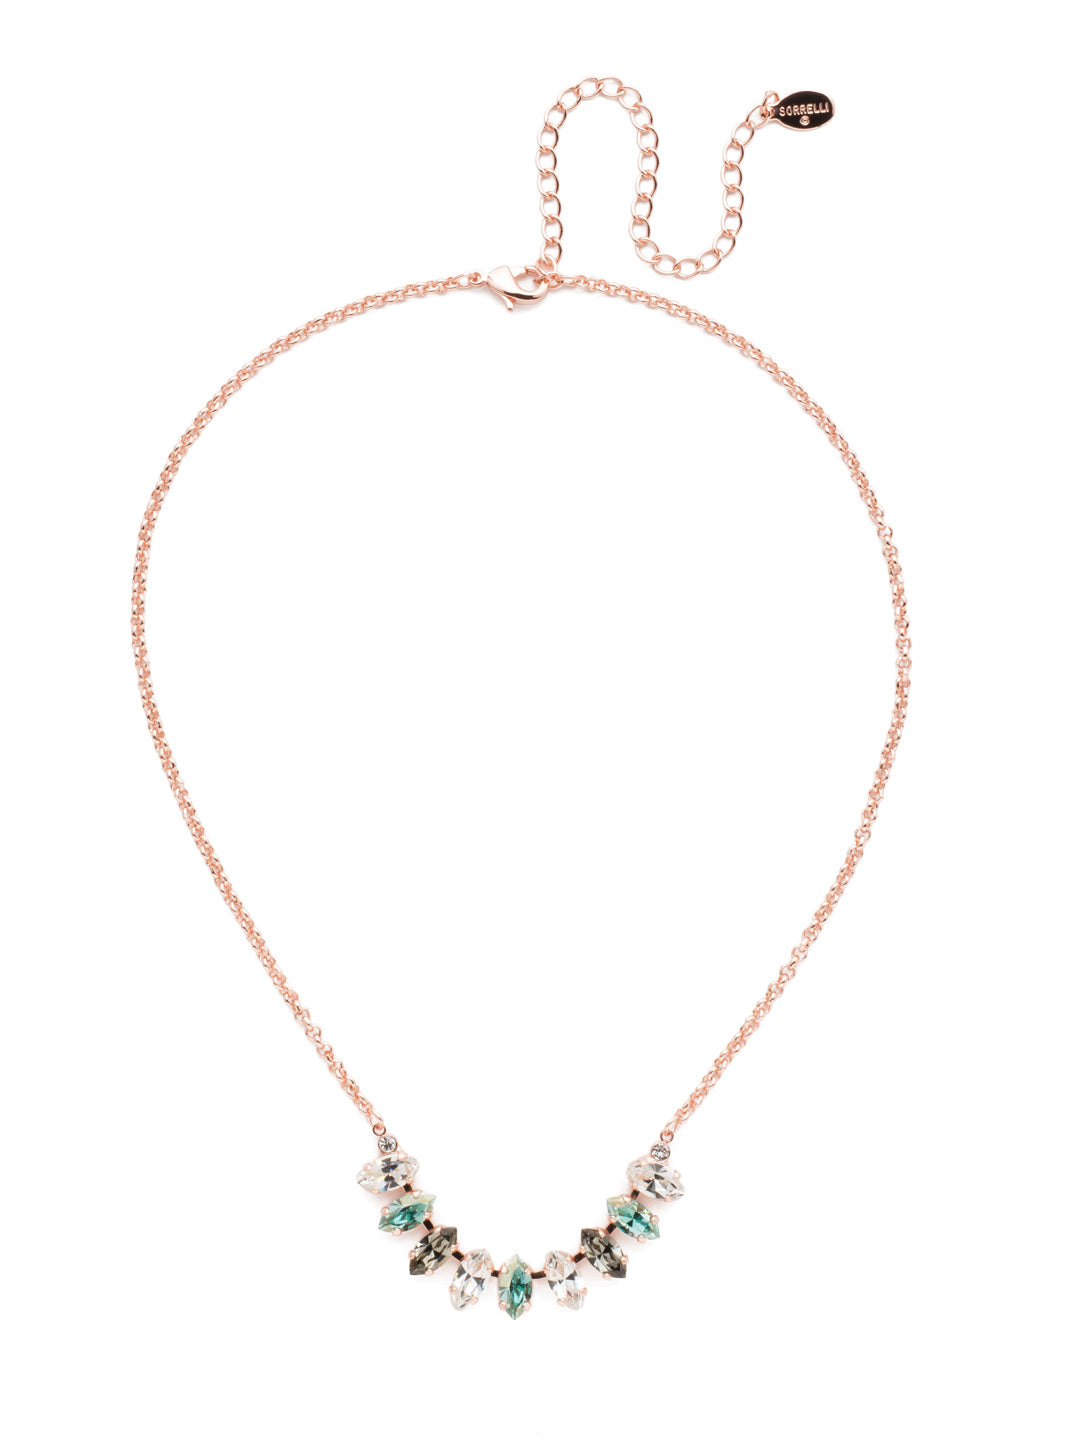 Clarissa Tennis Necklace - NEP4RGCAZ - The Clarissa Tennis Necklace puts a row of sparkling navette crystals front and center. Put it on when you want to be there, too. From Sorrelli's Crystal Azure collection in our Rose Gold-tone finish.